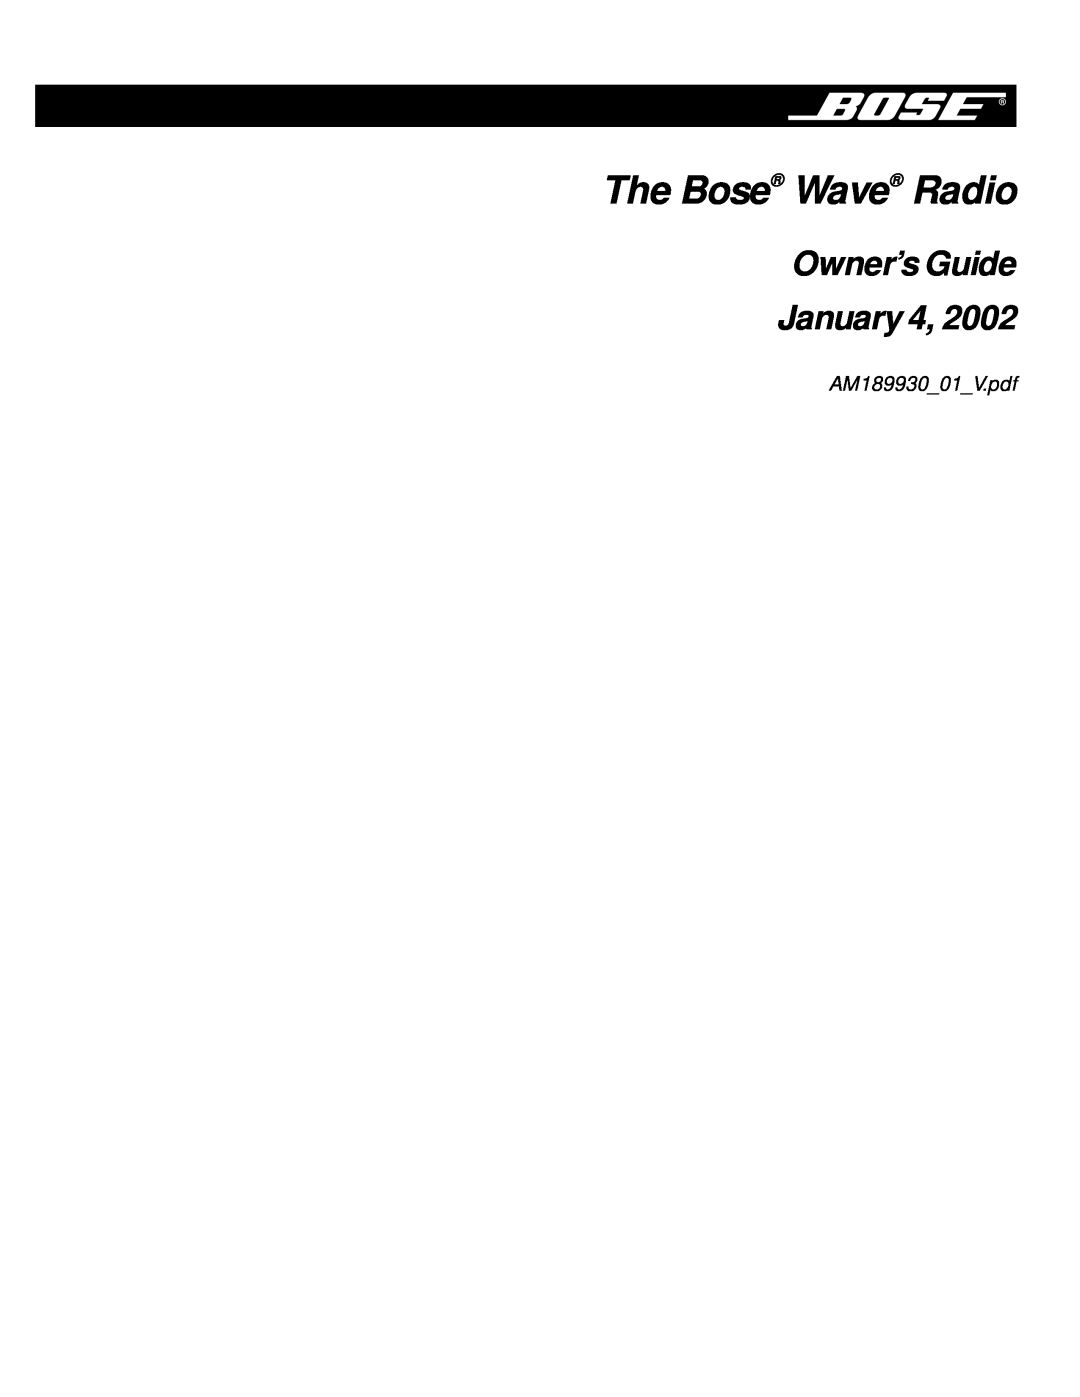 Bose AM189930 manual The Bose Wave Radio, Owner’s Guide January 